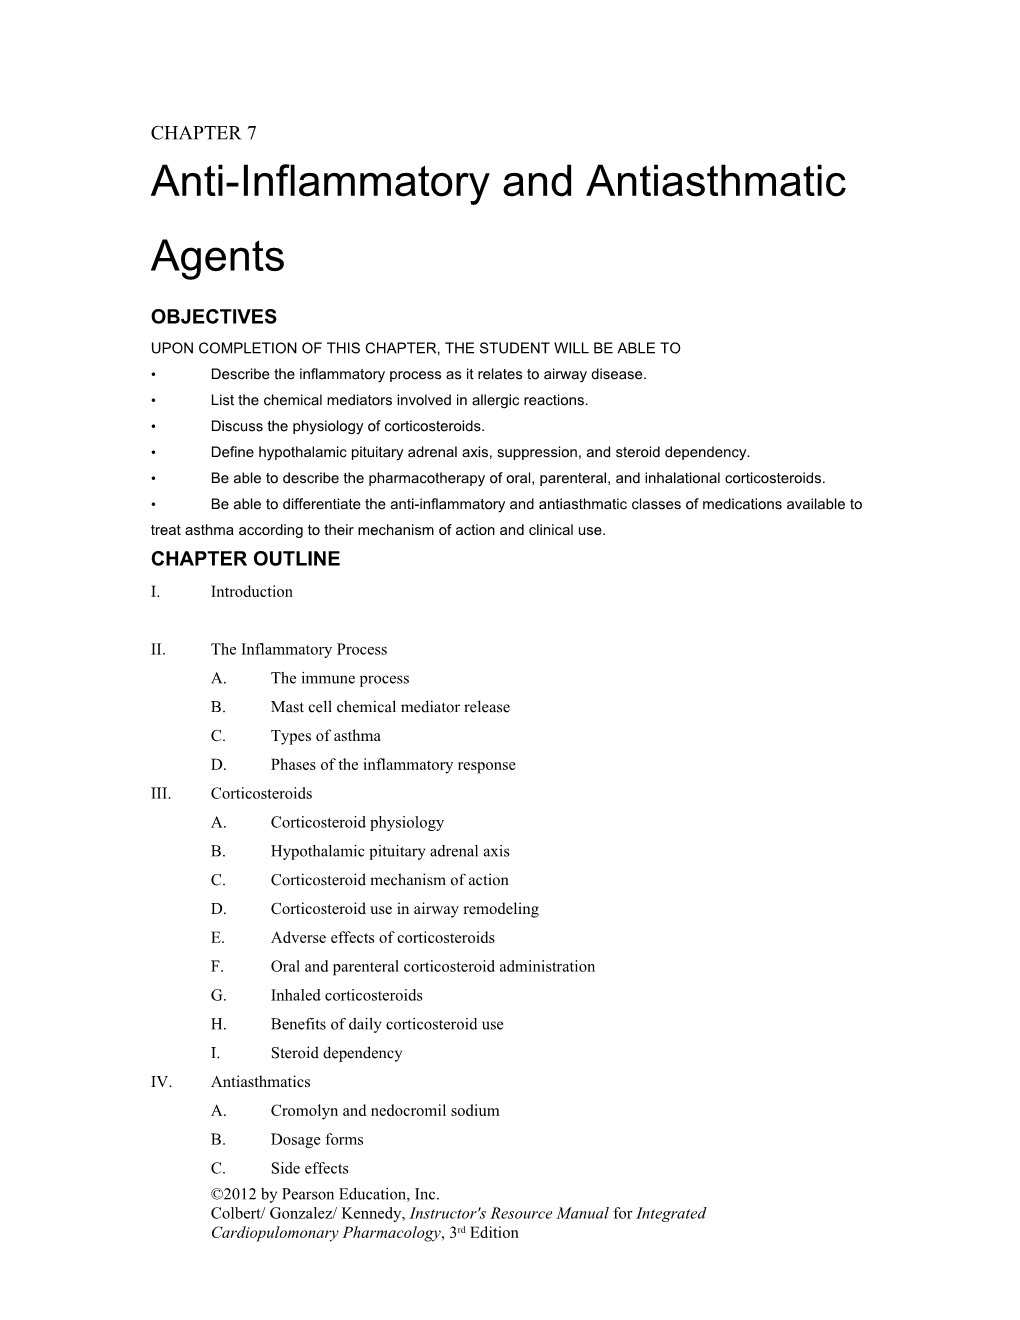 Anti-Inflammatory and Antiasthmatic Agents